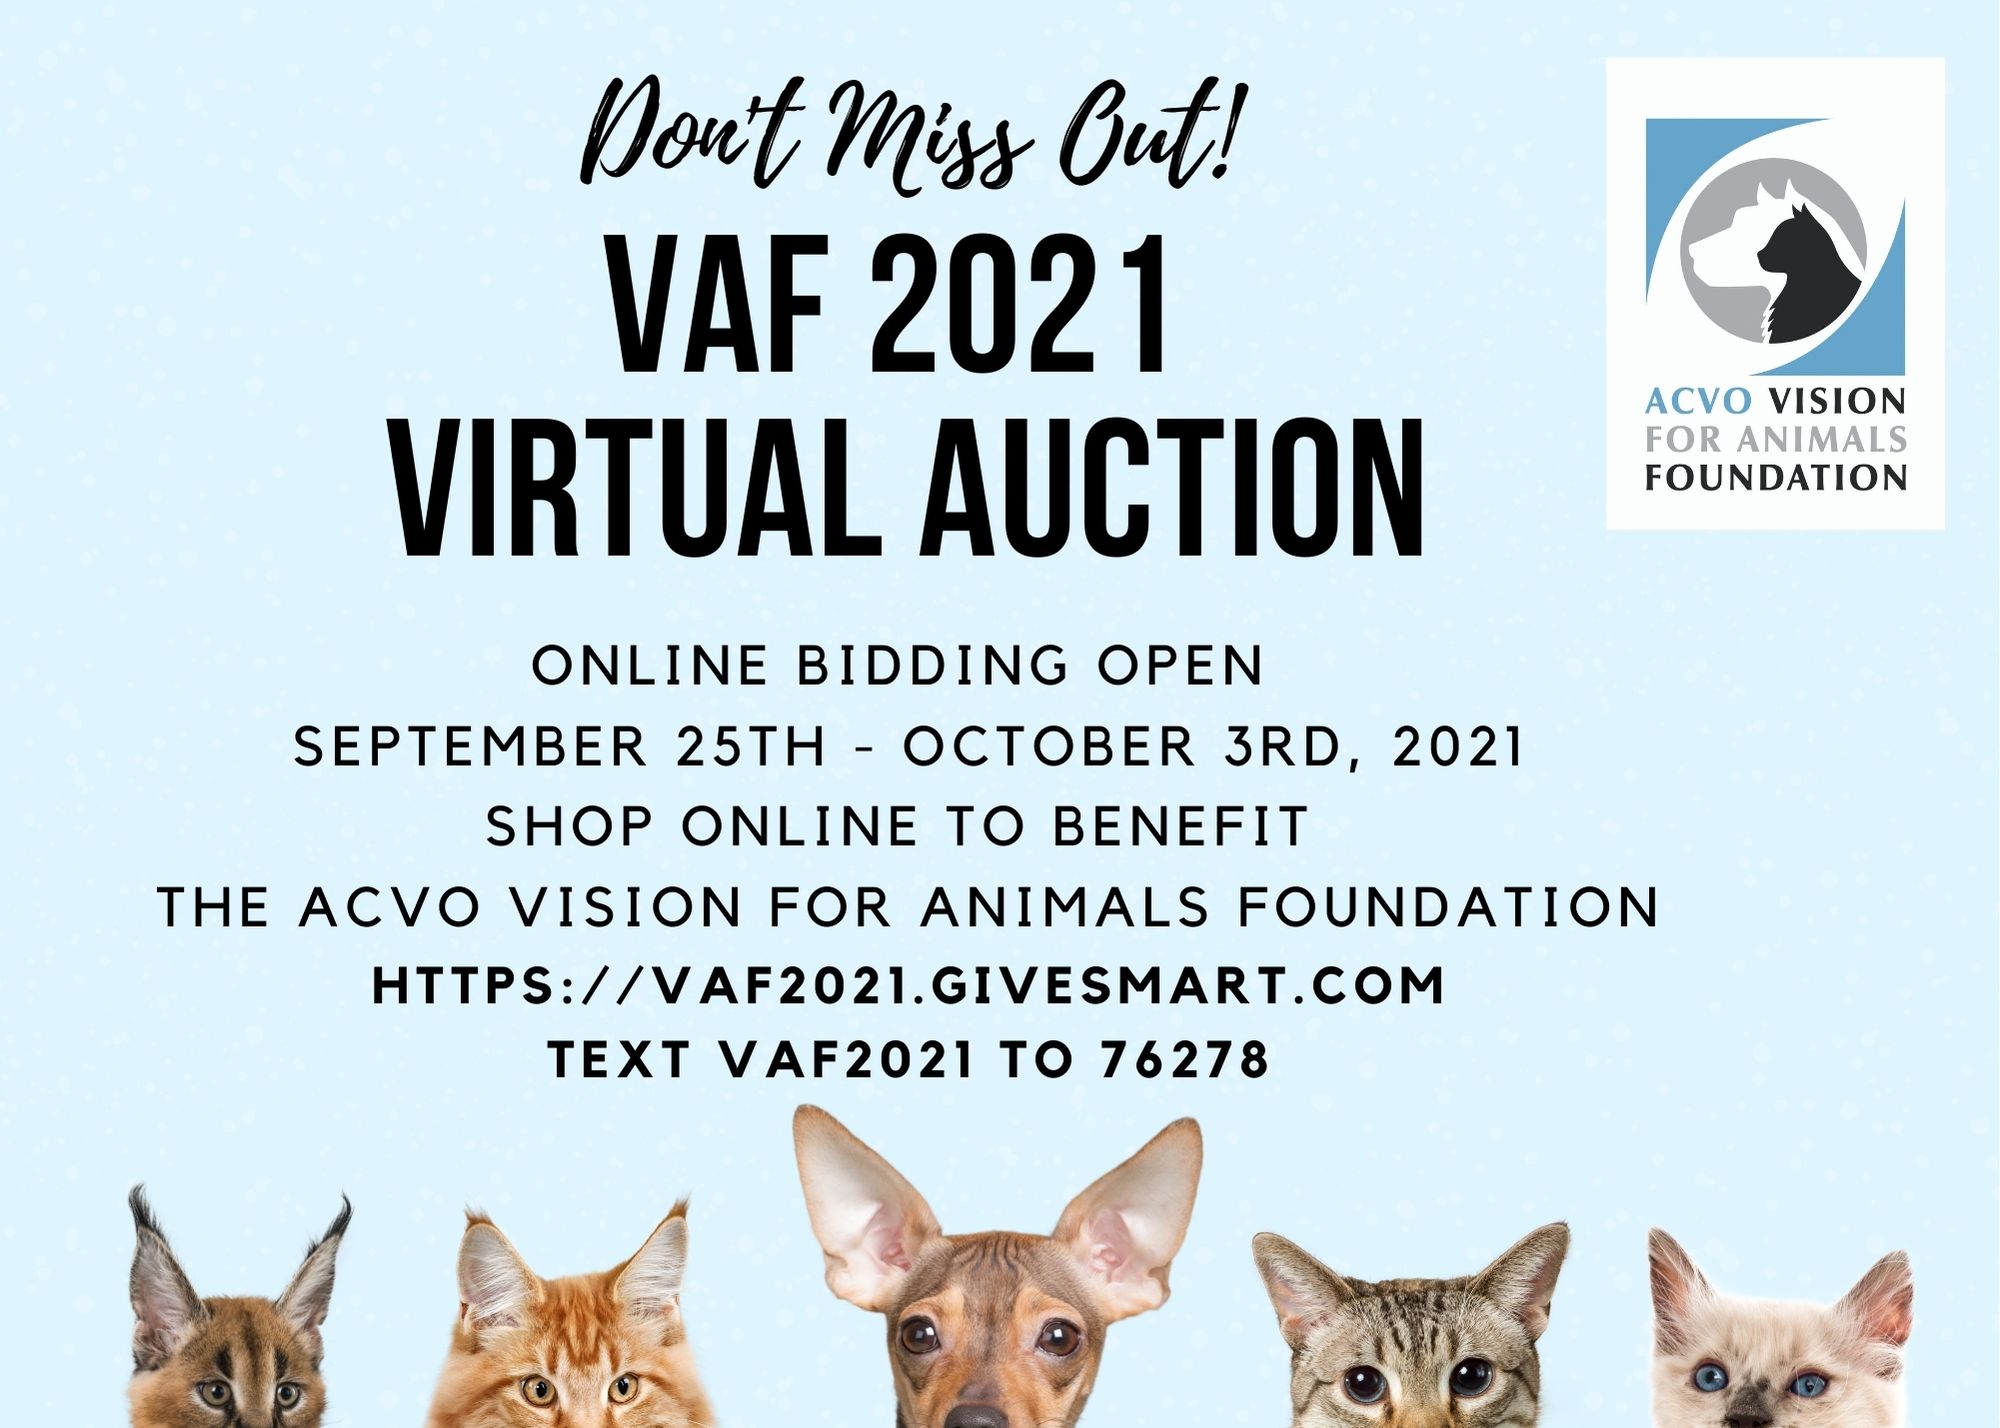 Vision For Animals Foundation